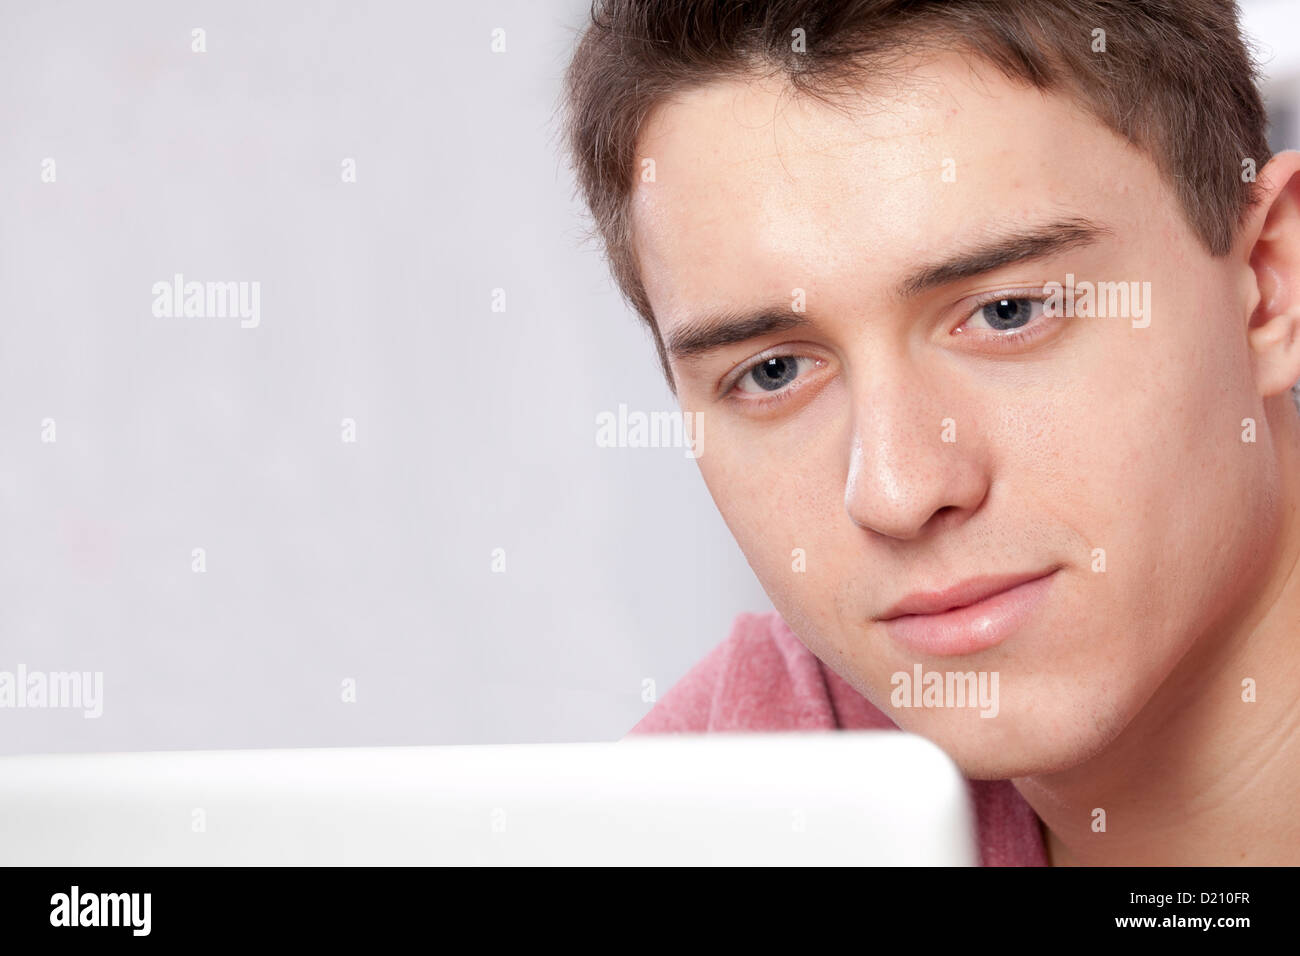 Close up shot of a young male using a laptop or digital tablet. Stock Photo